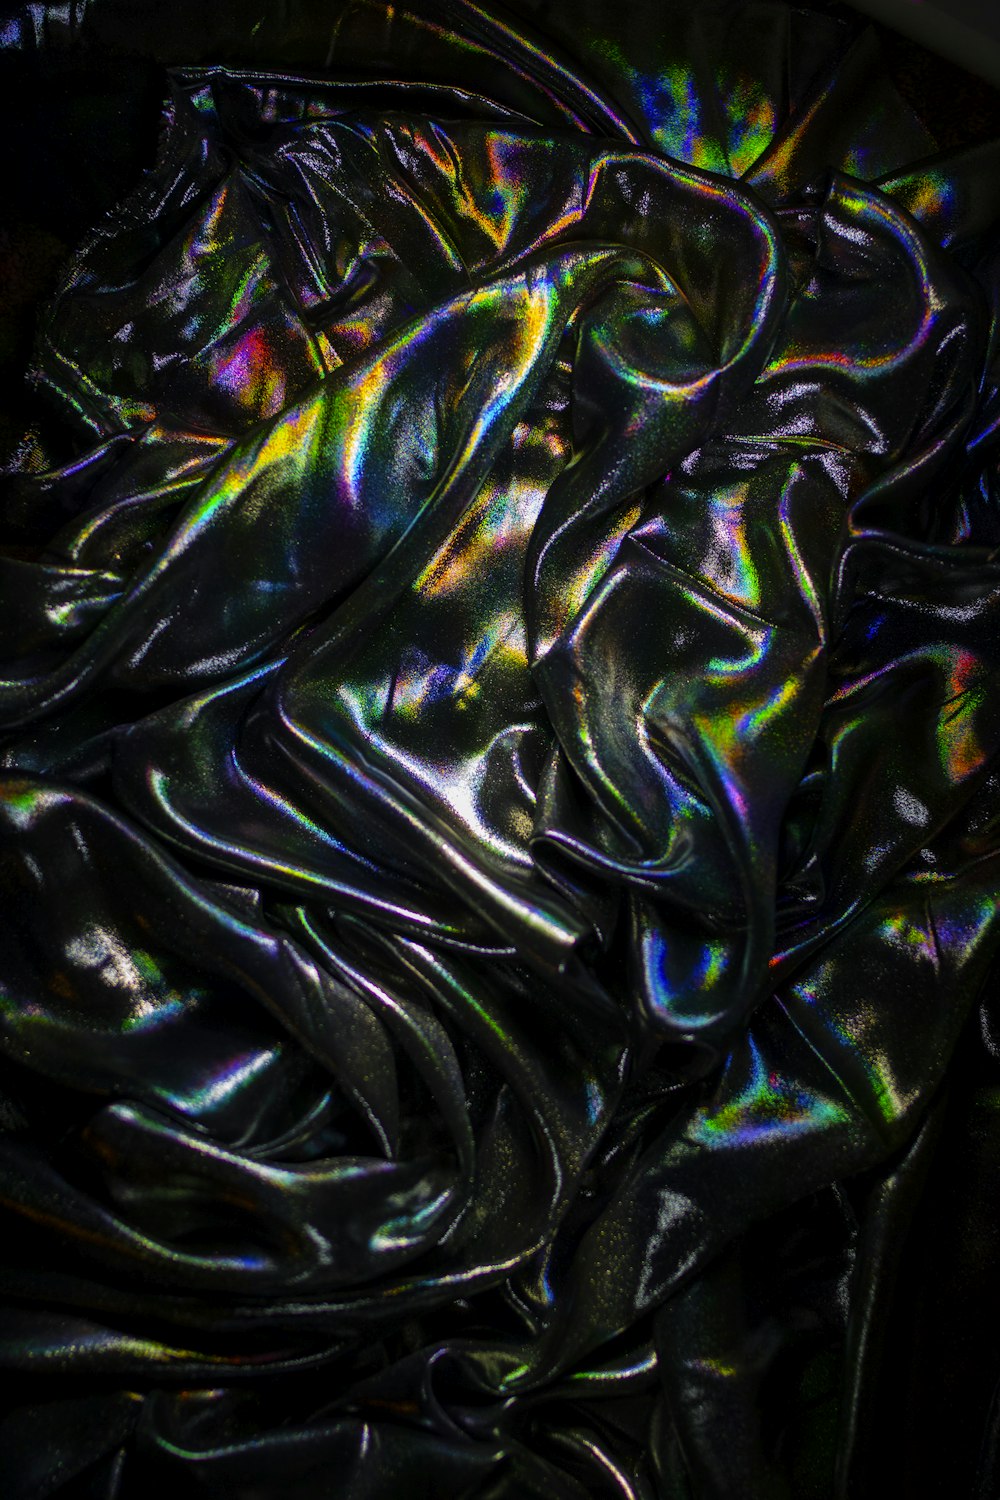 a close up view of a shiny material